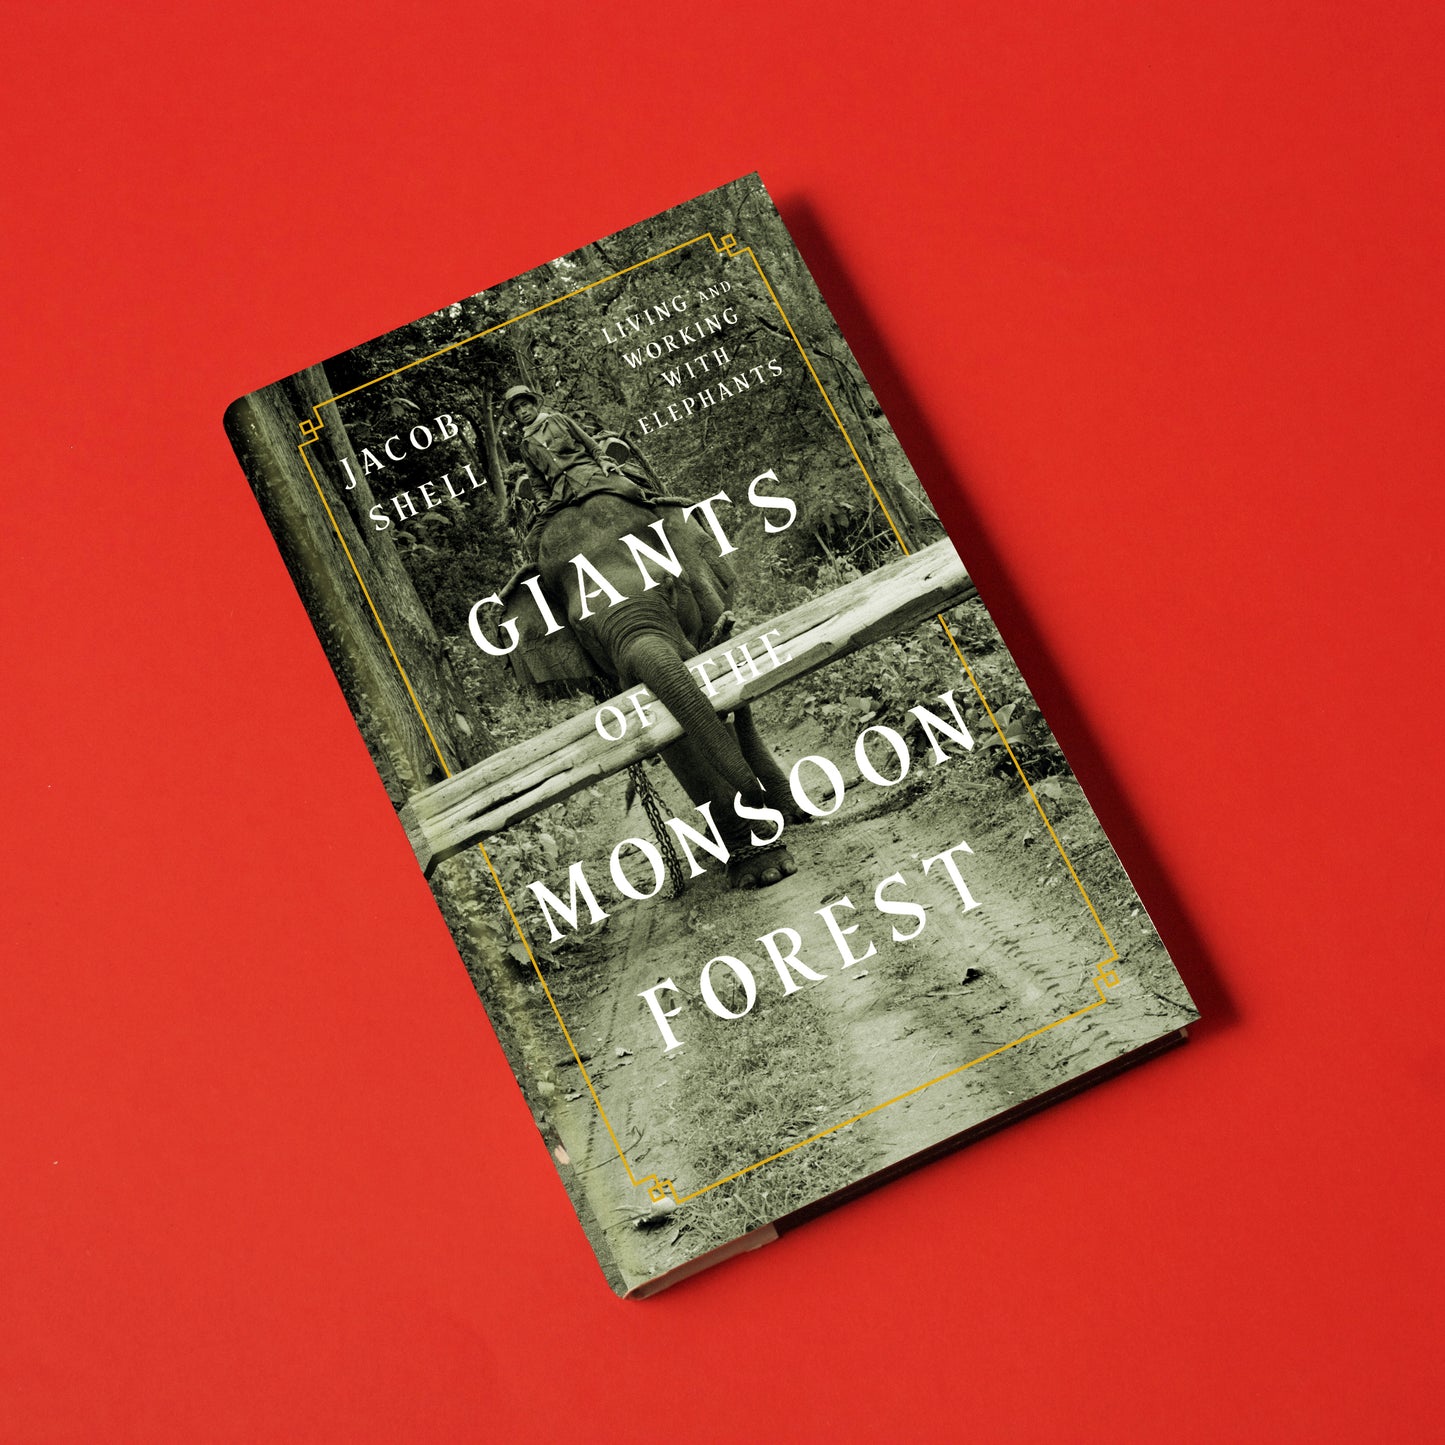 Giants of the Monsoon Forest, by Jacob Shell